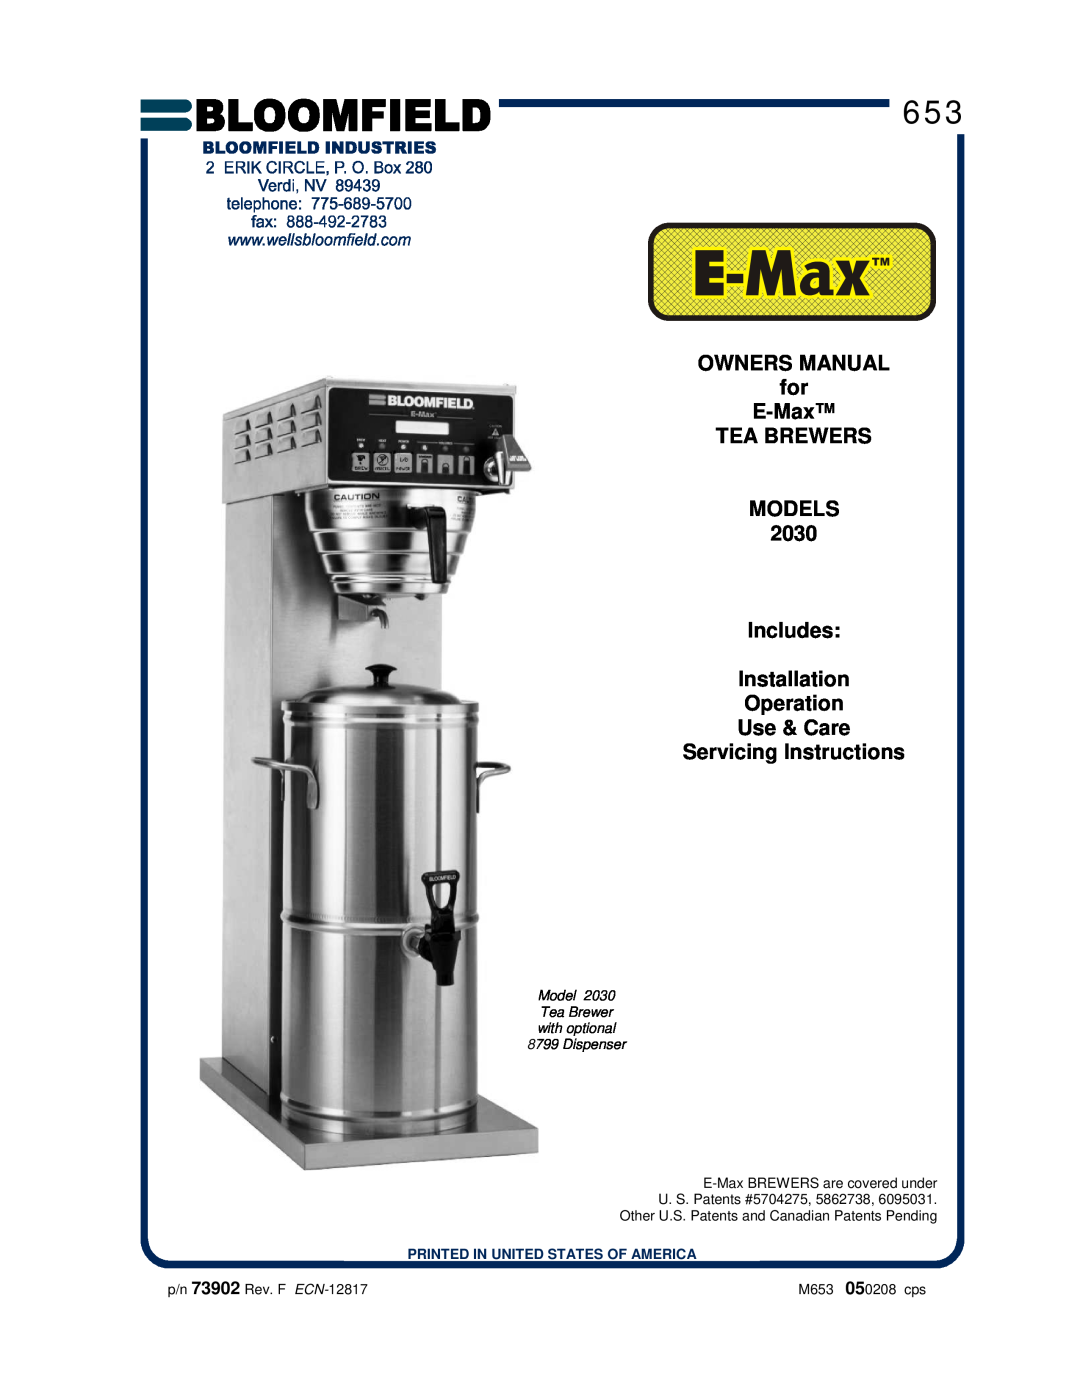 Bloomfield 2030 owner manual Operation Use & Care Servicing Instructions, Model, Tea Brewer with optional 8799 Dispenser 